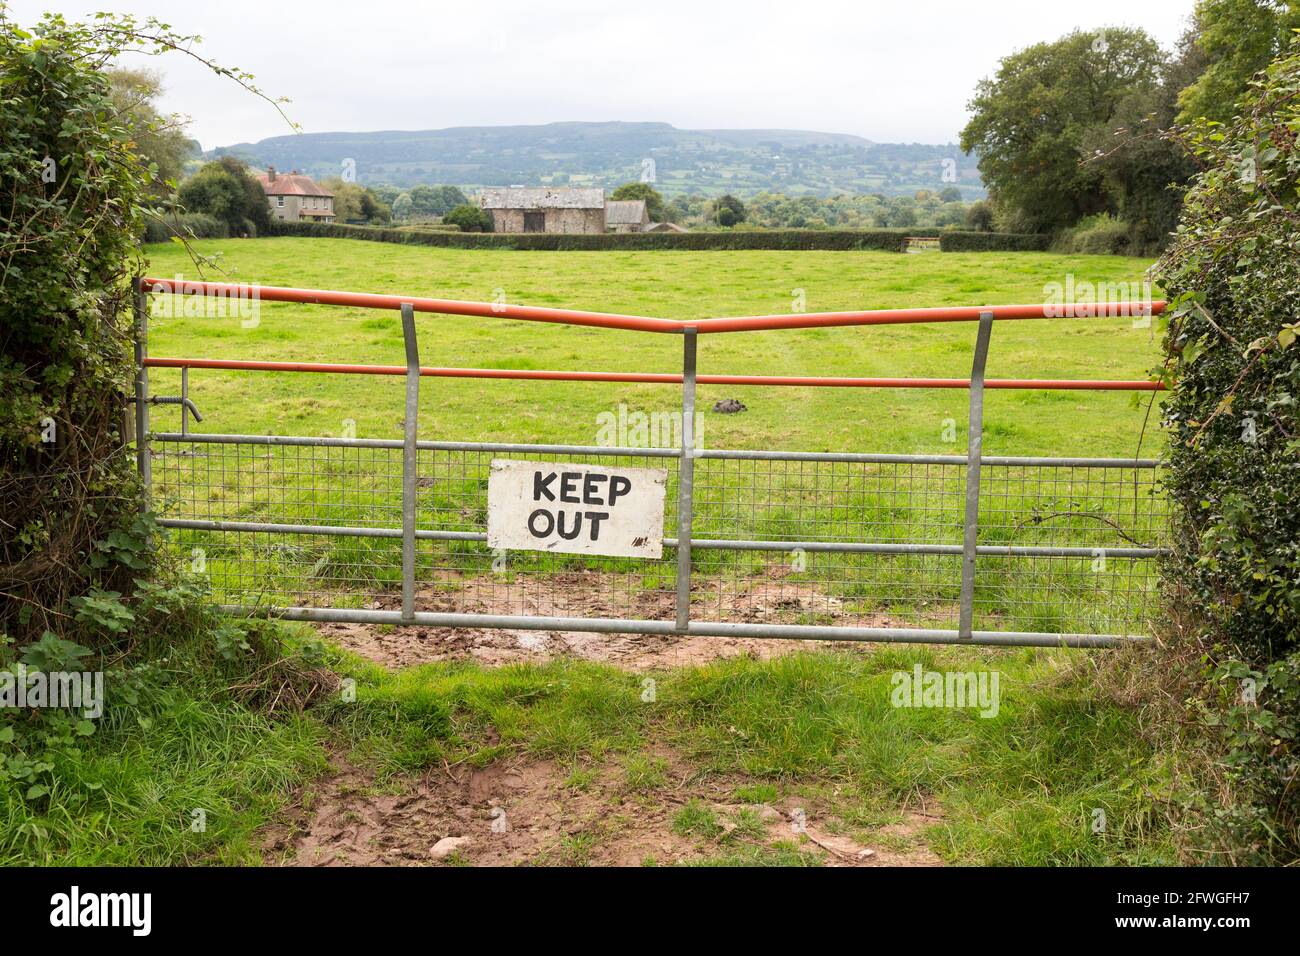 Field with gate and keep out sign, Pyscodlyn, Wales, UK Stock Photo